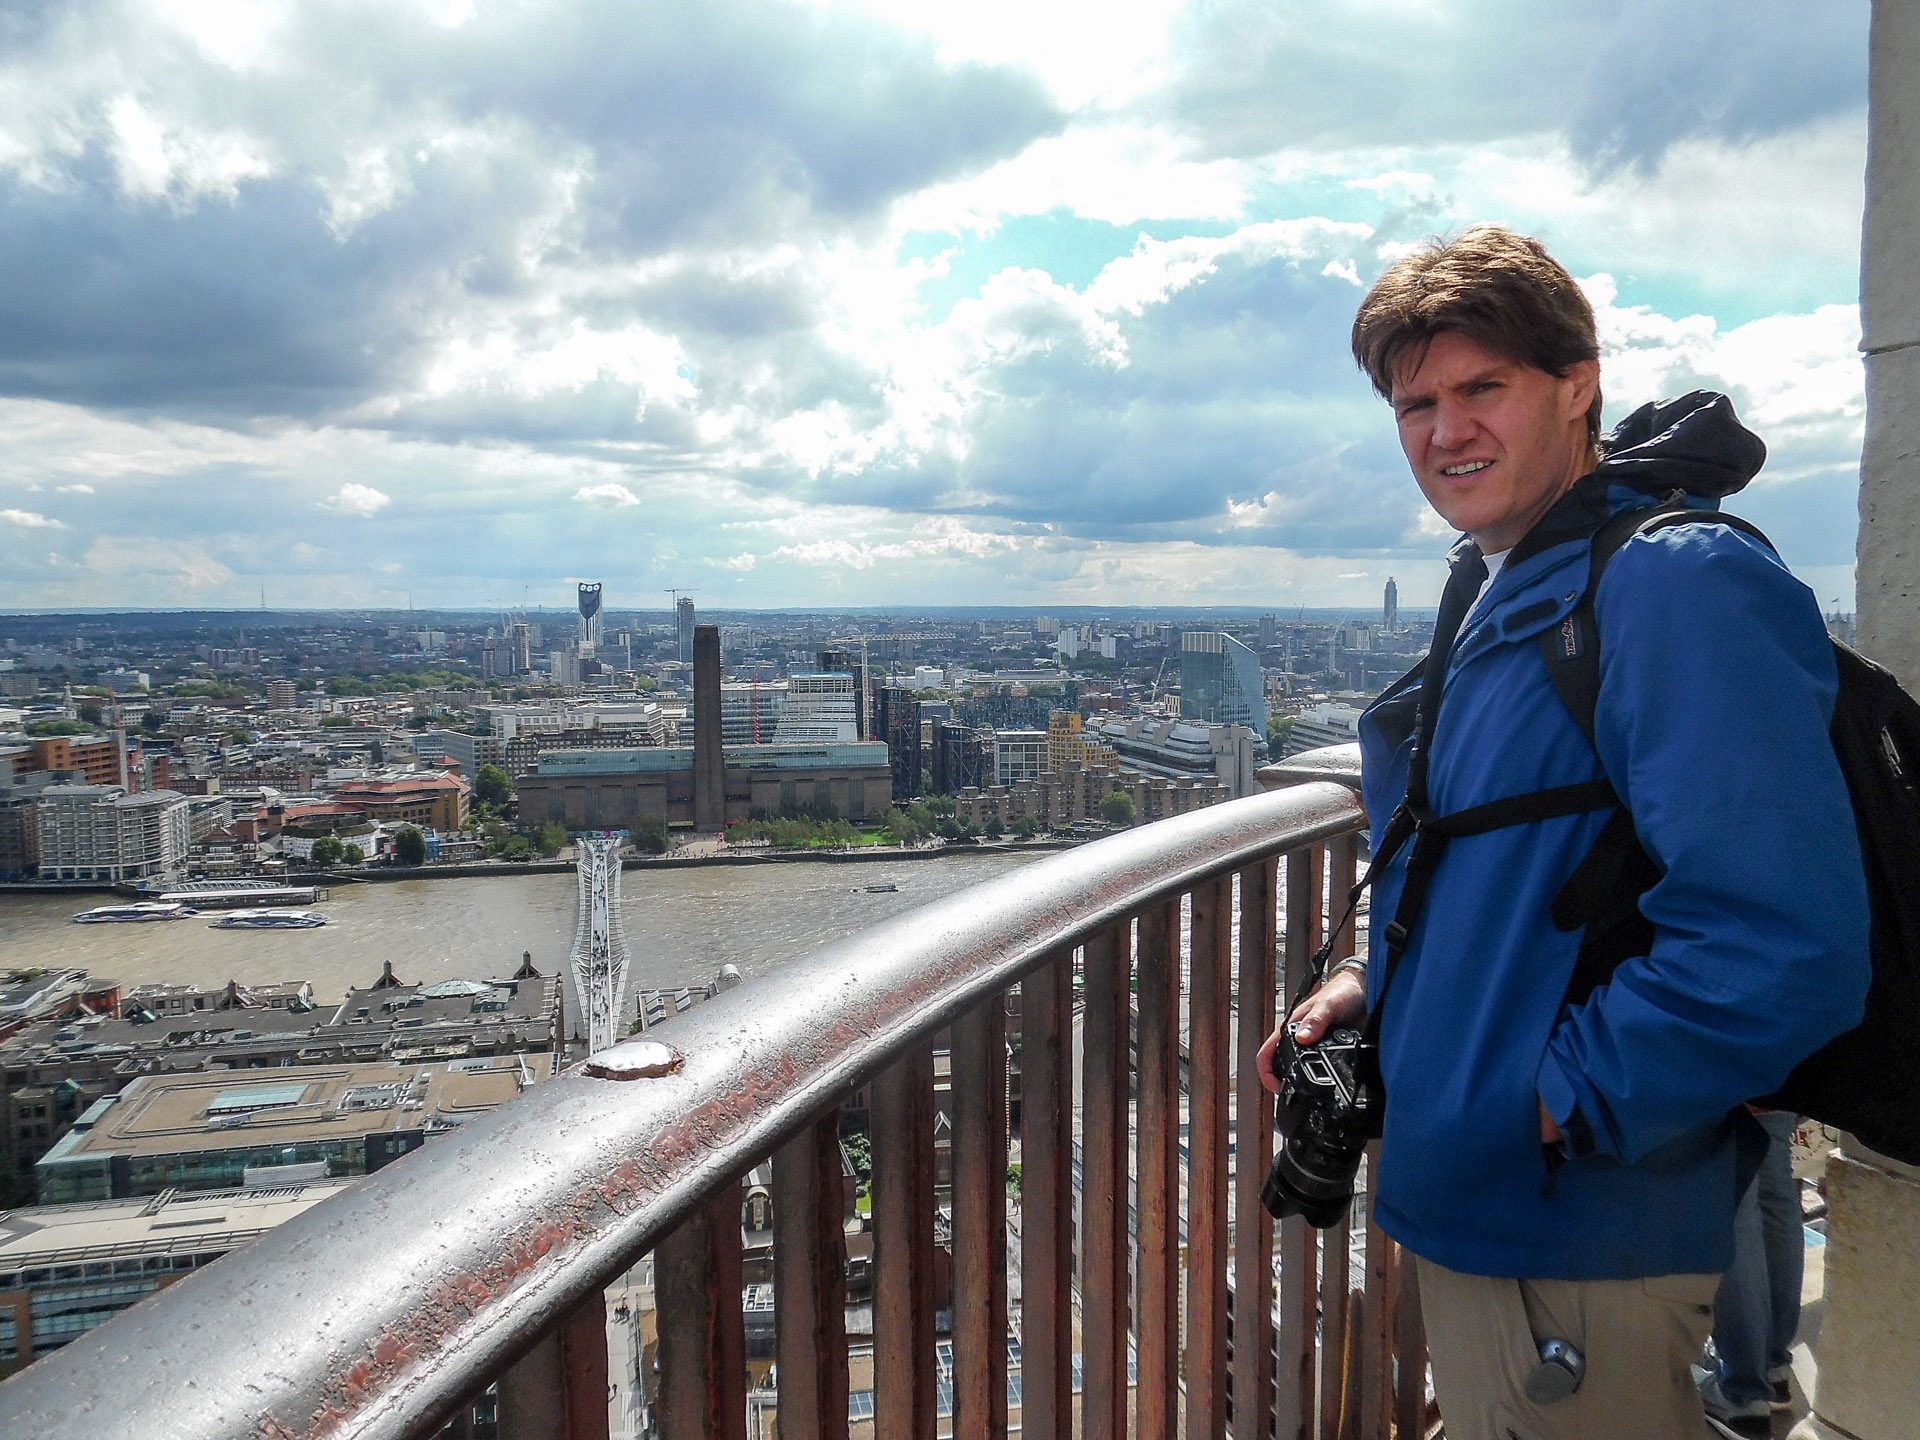 Paul at the Golden Galltery at the top of cupola of St. Paul's Cathedral in London